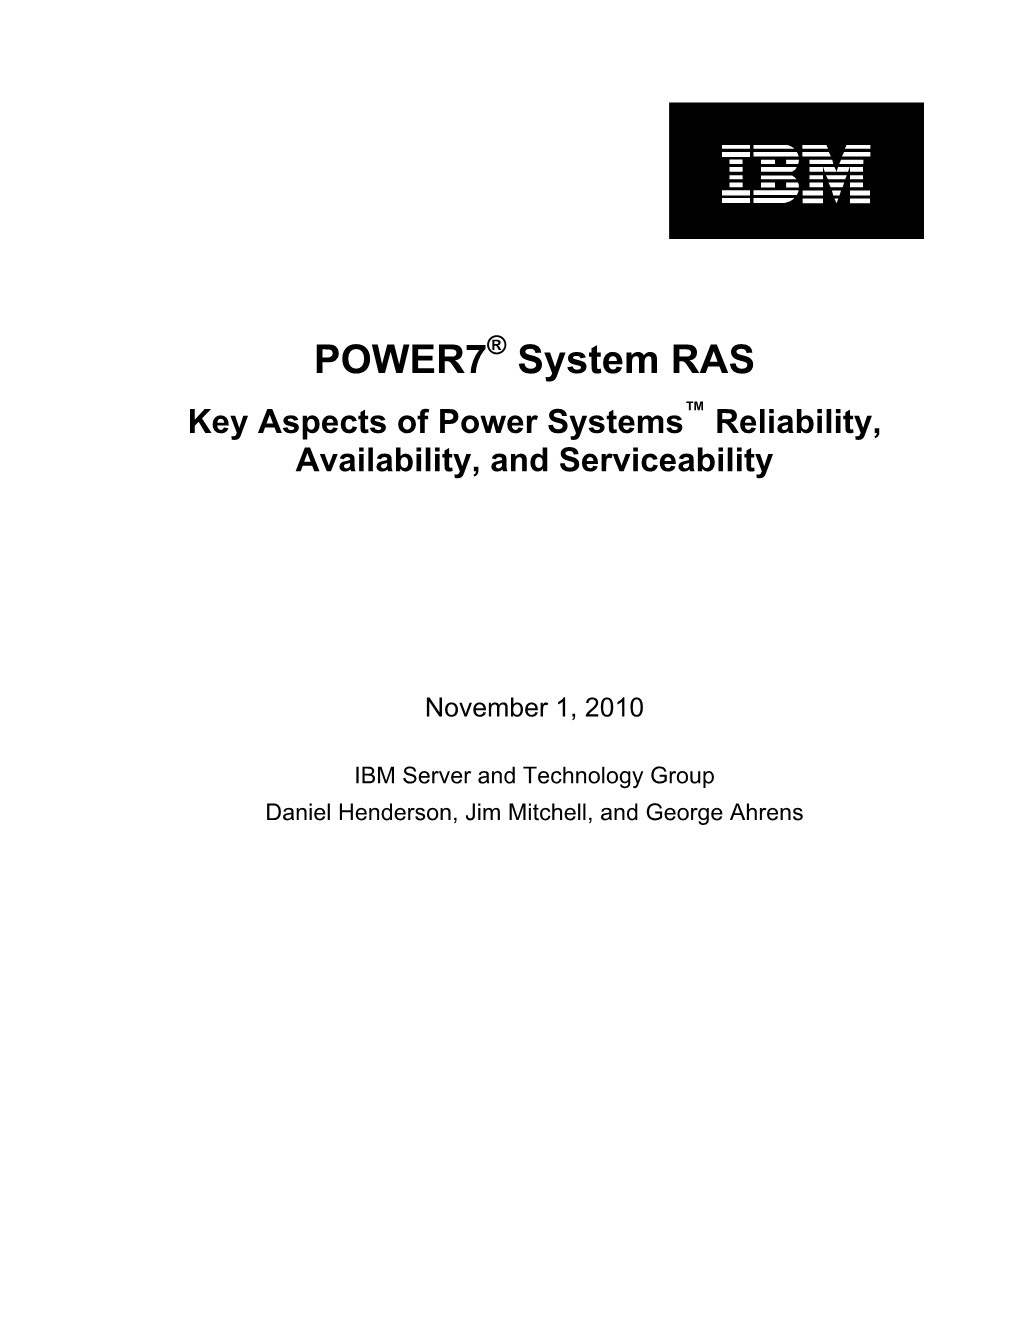 POWER7 Systems -- Integrated Across Hardware and Software -- a Key Requirement for Managing Millions of Concurrent Transactions